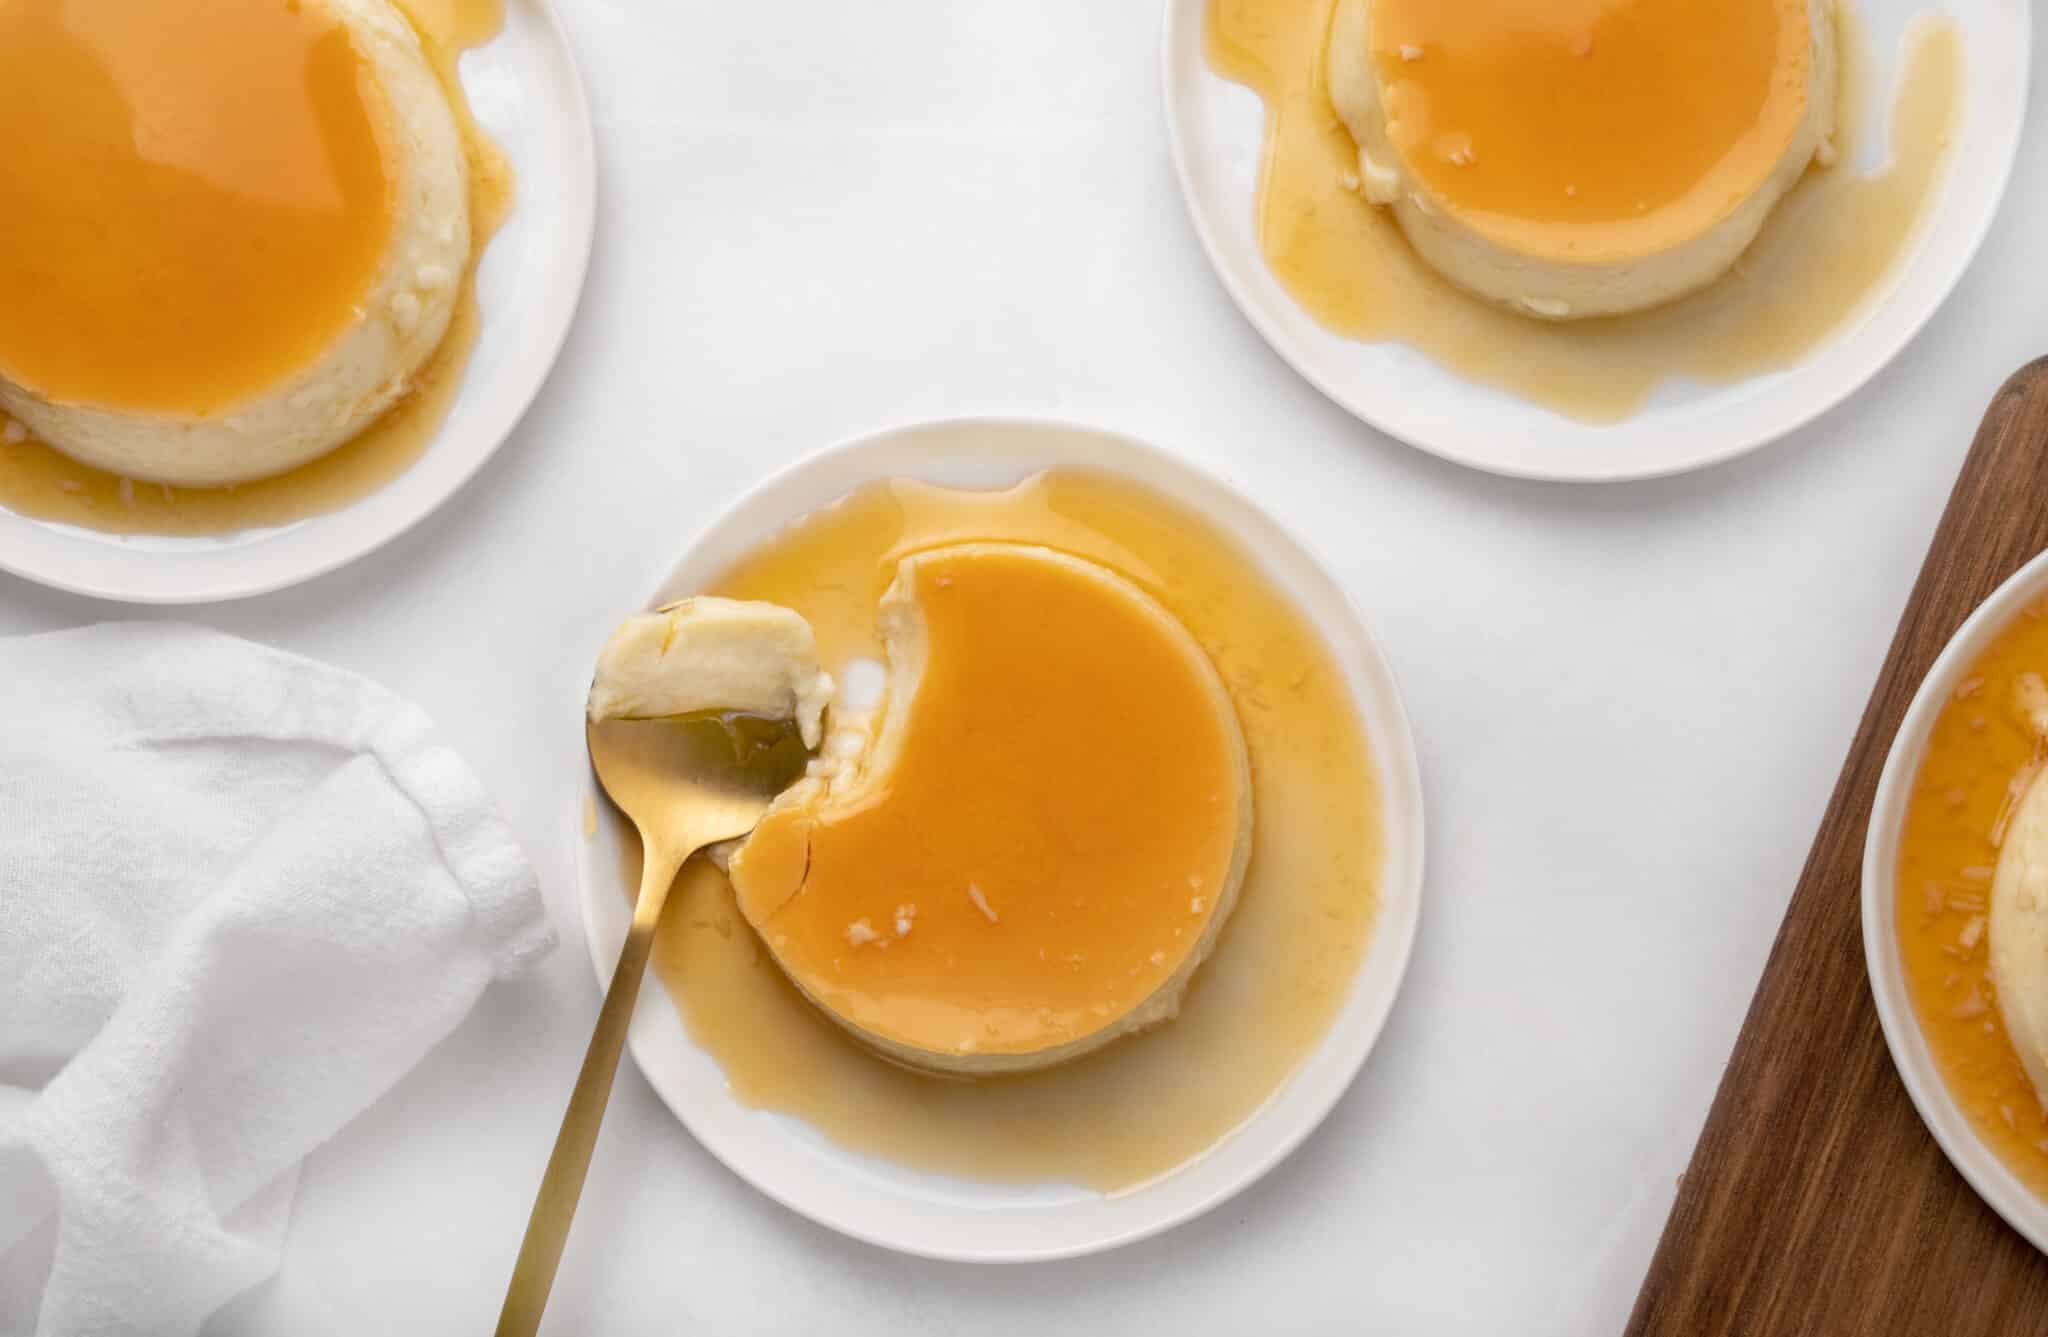 3 white plates of flan with caramel sauce